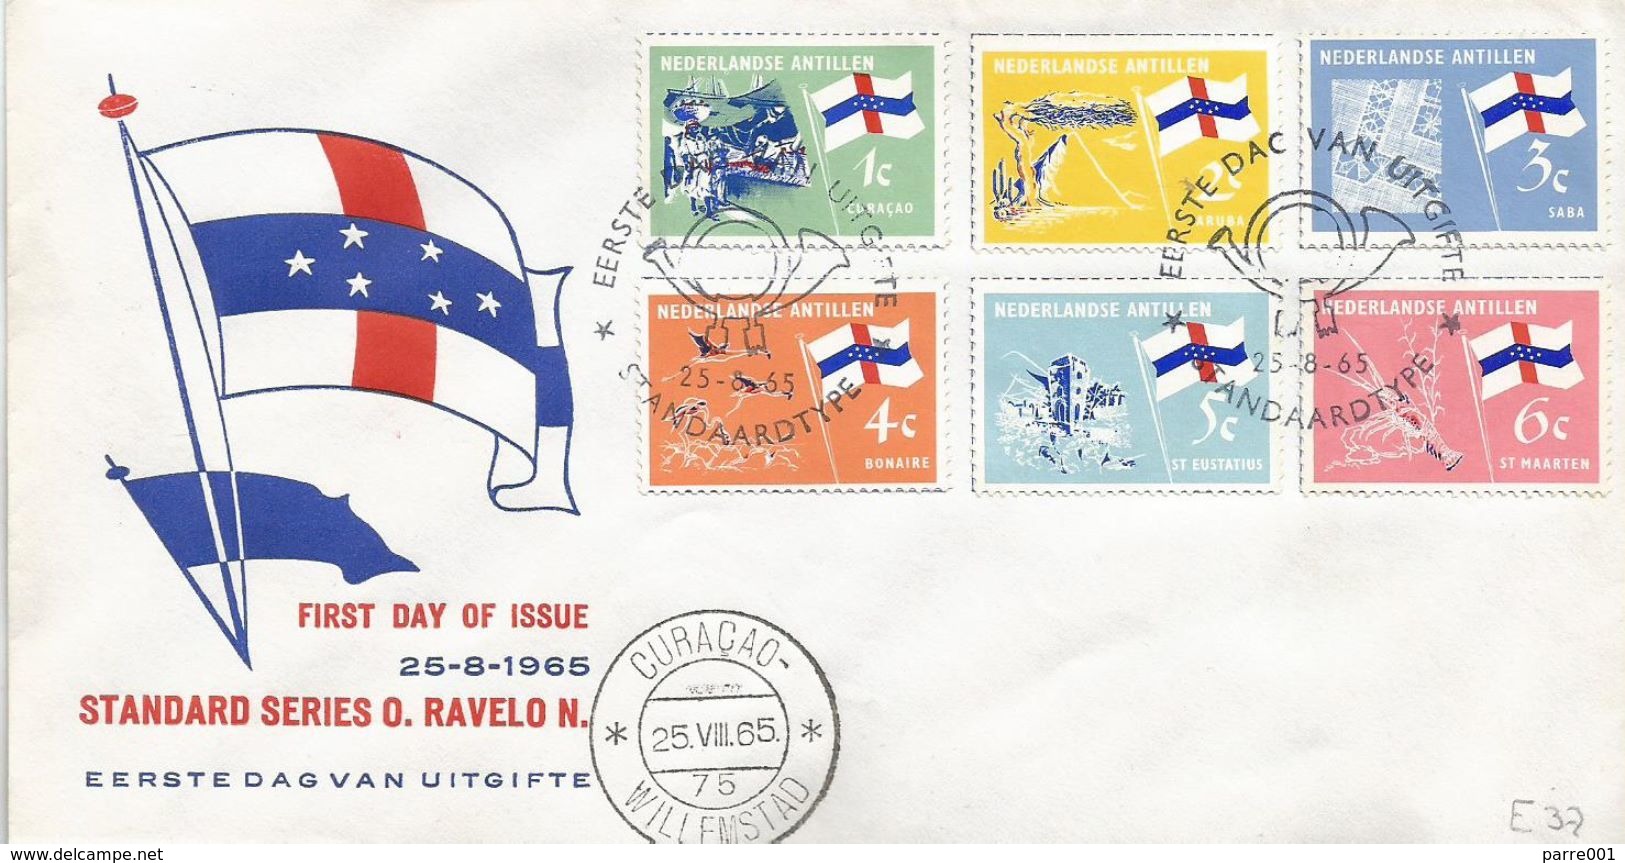 Netherlands Antilles 1965 Curacao Flamingo Phoenicopterus Ruber Ruber Lobster Lace Tourism Flag FDC Cover - Flamingo